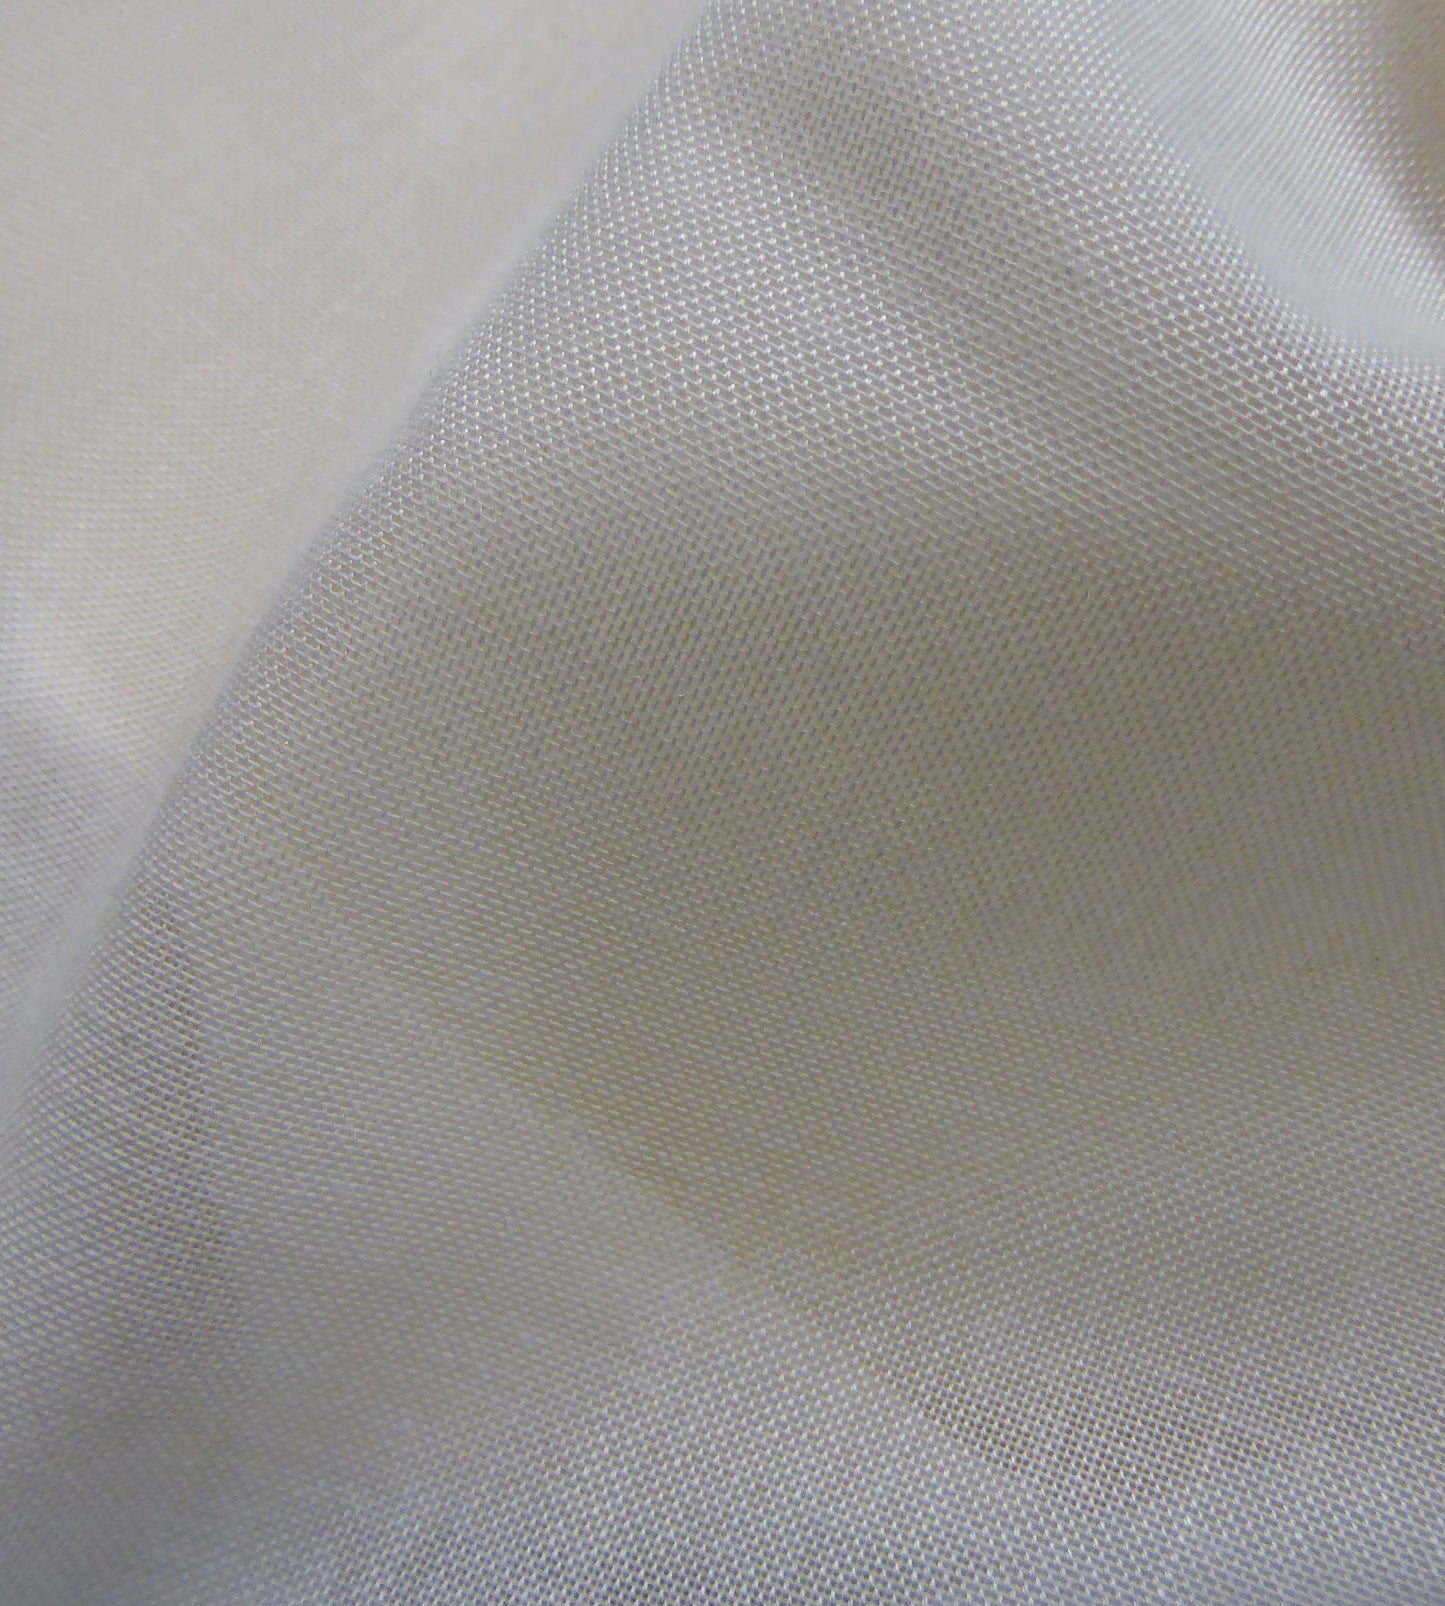 Purchase Old World Weavers Fabric SKU FT 00200203, Voile Etamine M1 Champagne 1